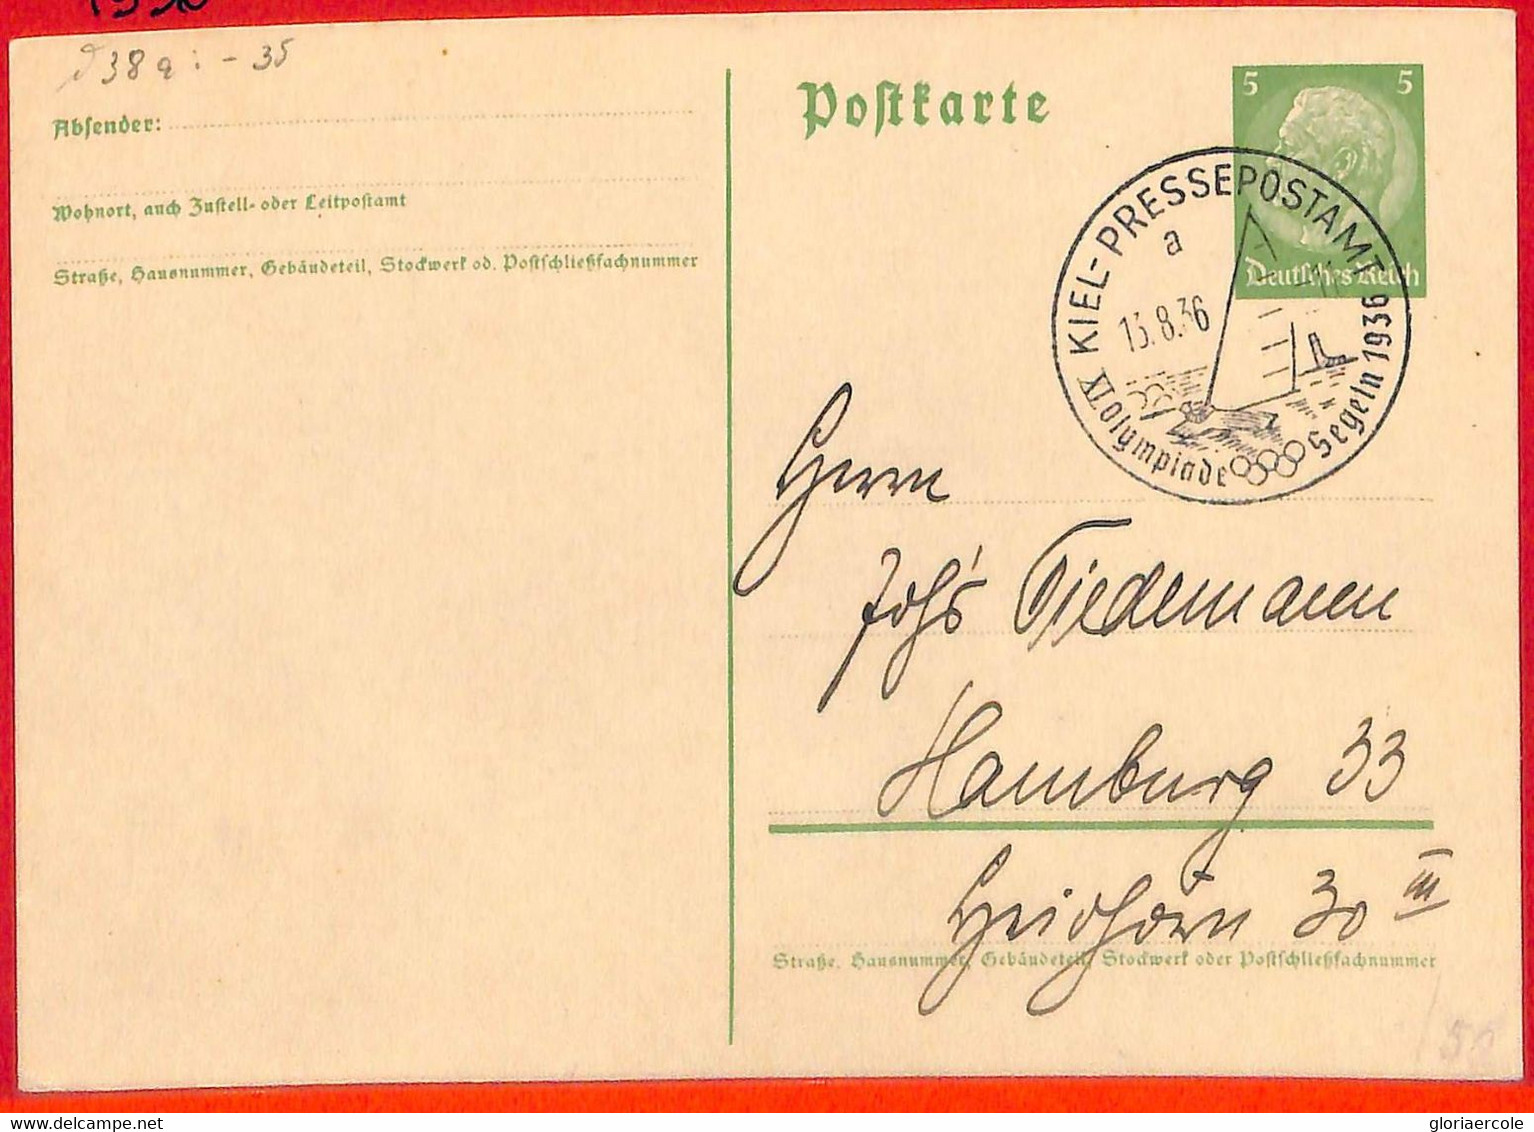 Aa2563 - Germany - POSTAL HISTORY - 1936 Olympic Games SPECIAL POSTMARK Sailing - Sommer 1936: Berlin